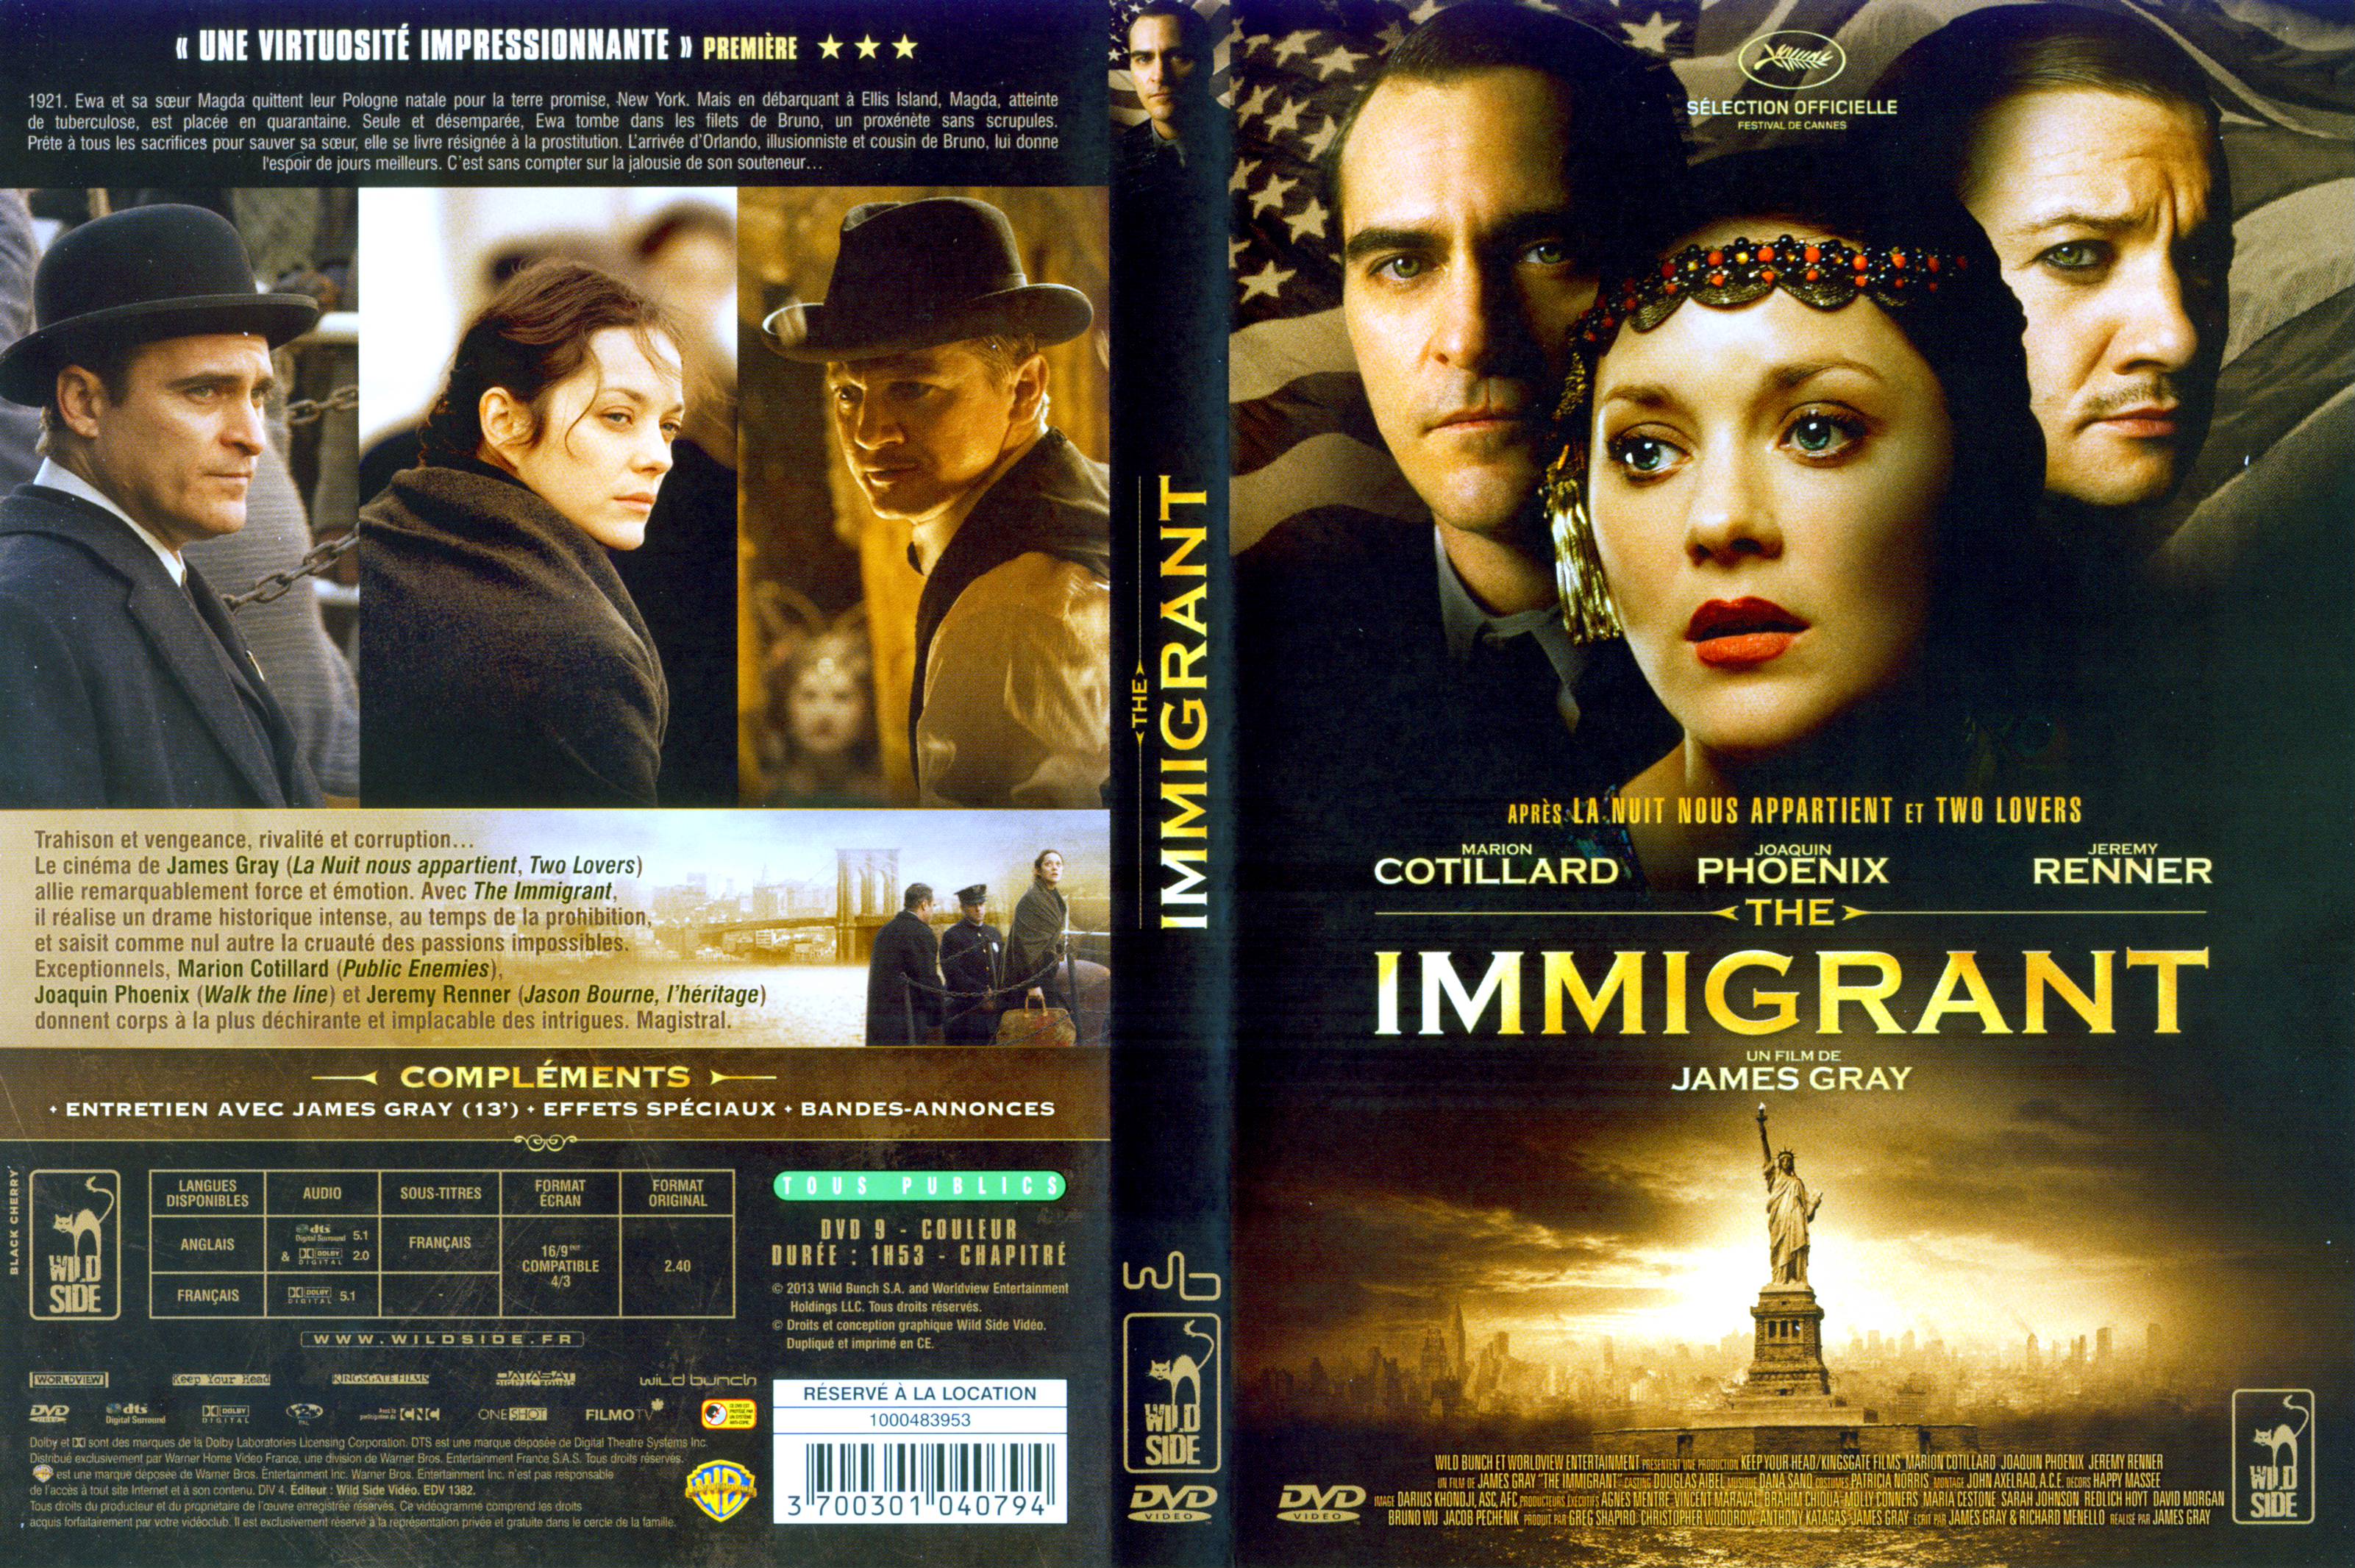 Jaquette DVD The Immigrant